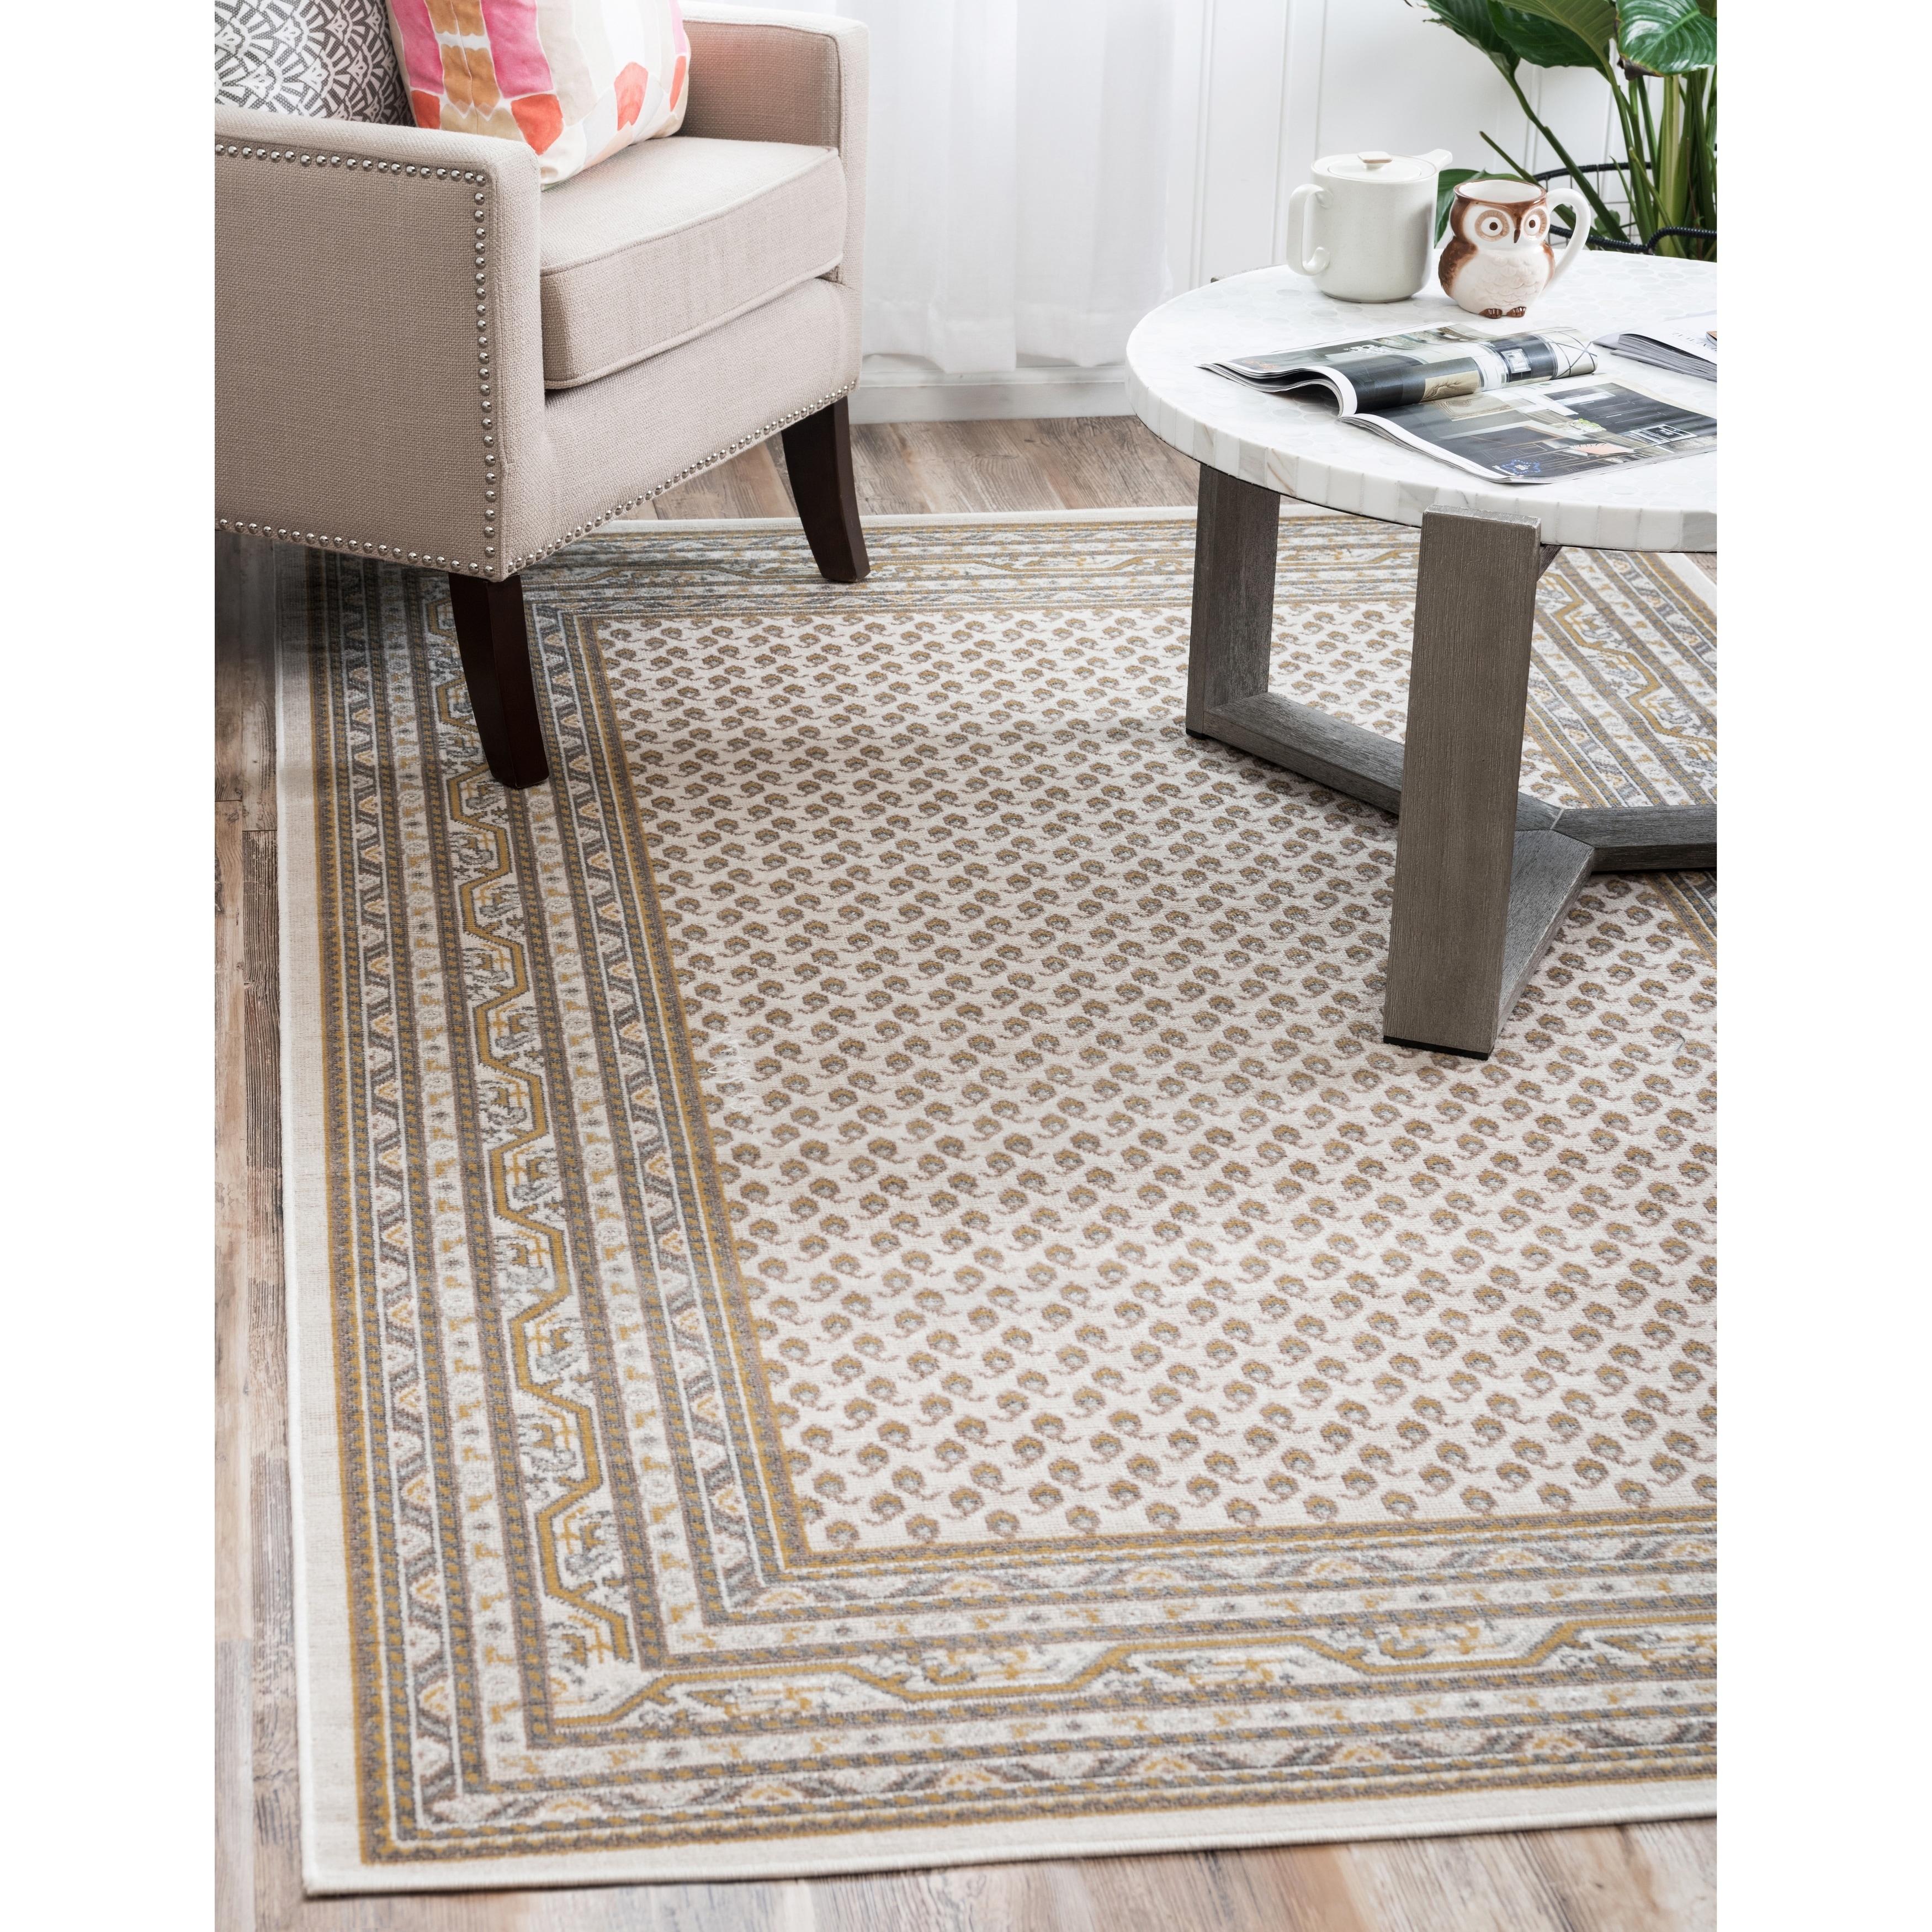 Unique Loom Indoor Rectangular Geometric Traditional Area Rugs Beige/Yellow/Off-White, 10' 0 x 13' 0 - image 1 of 4